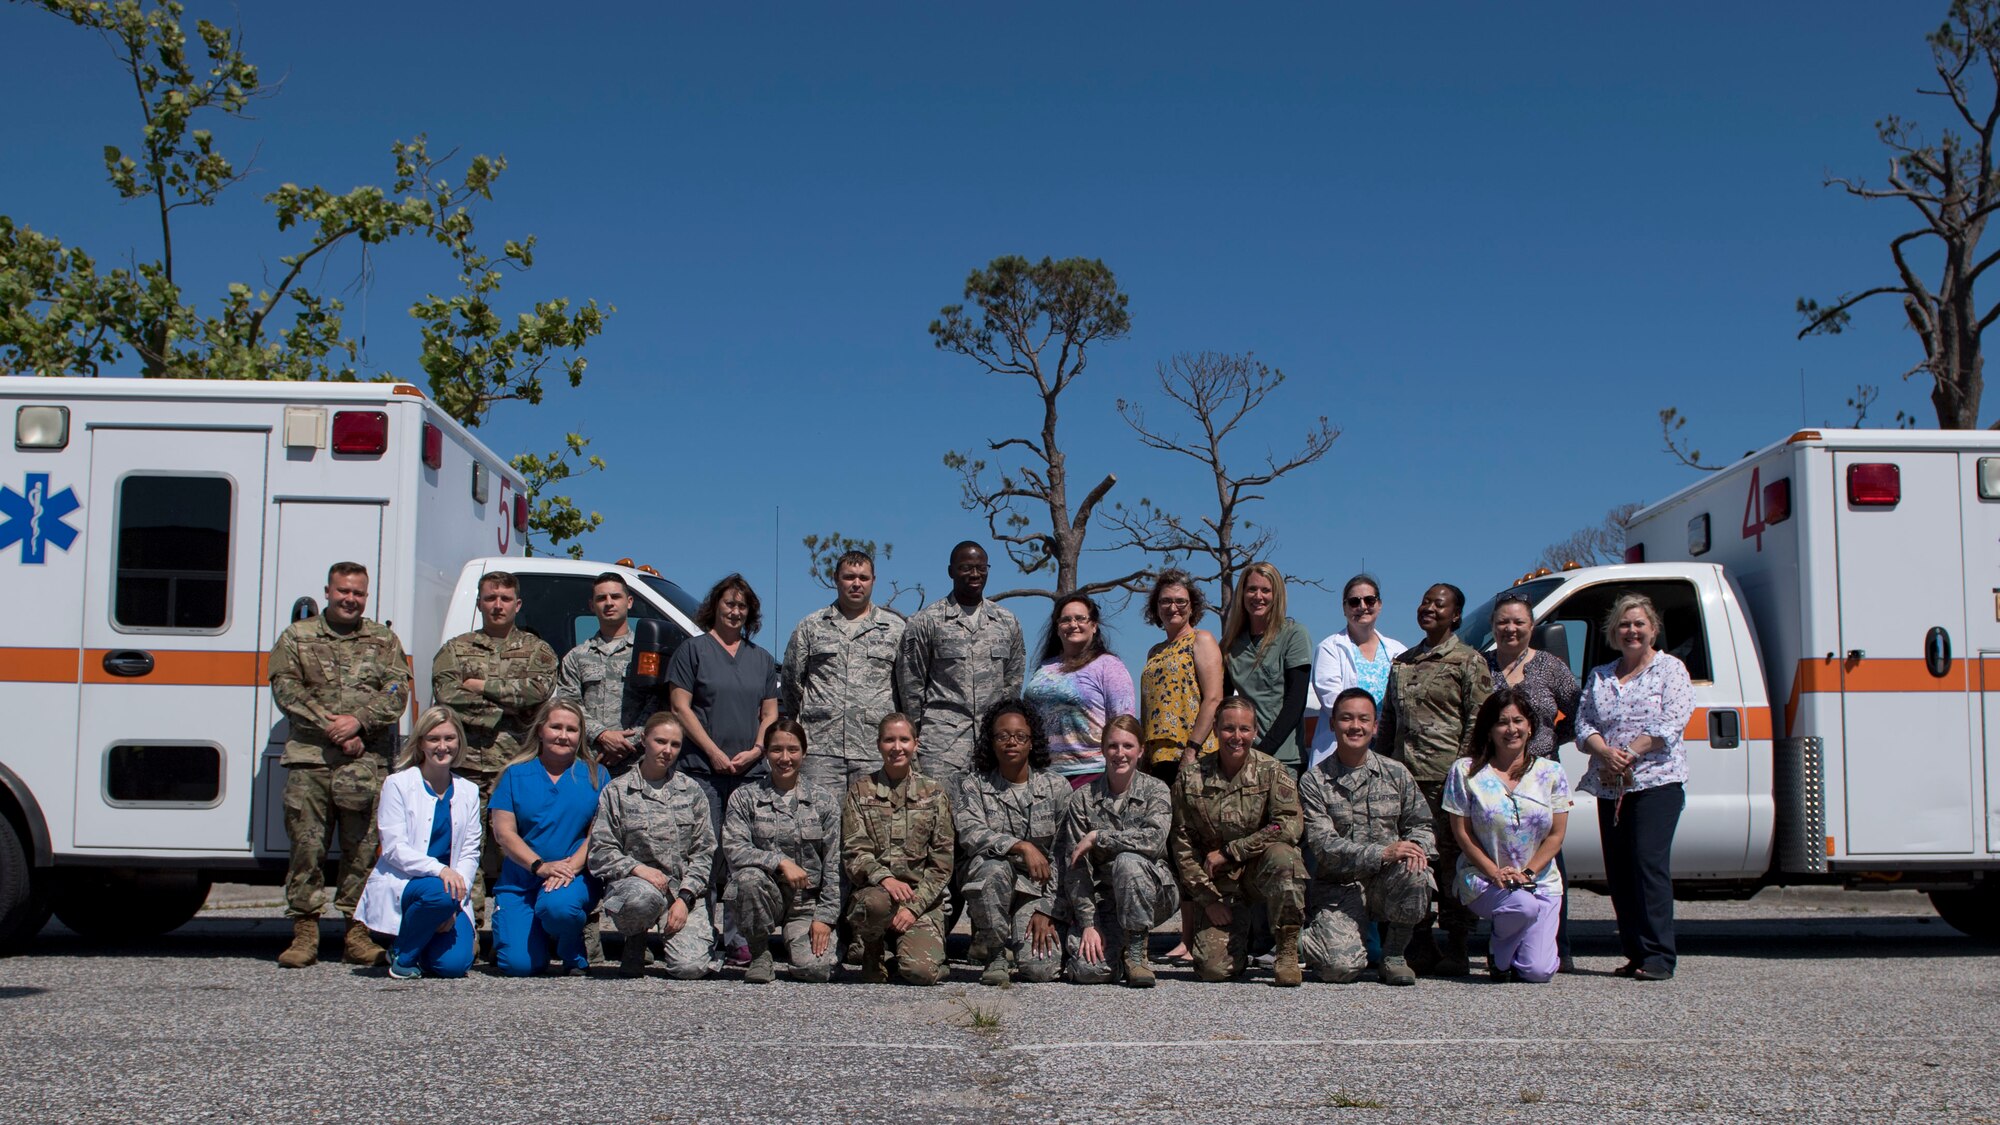 Personnel assigned to the 325th Medical Group pose for a photo in observance of National Nurses Week at Tyndall Air Force Base, Florida, May 6, 2019.